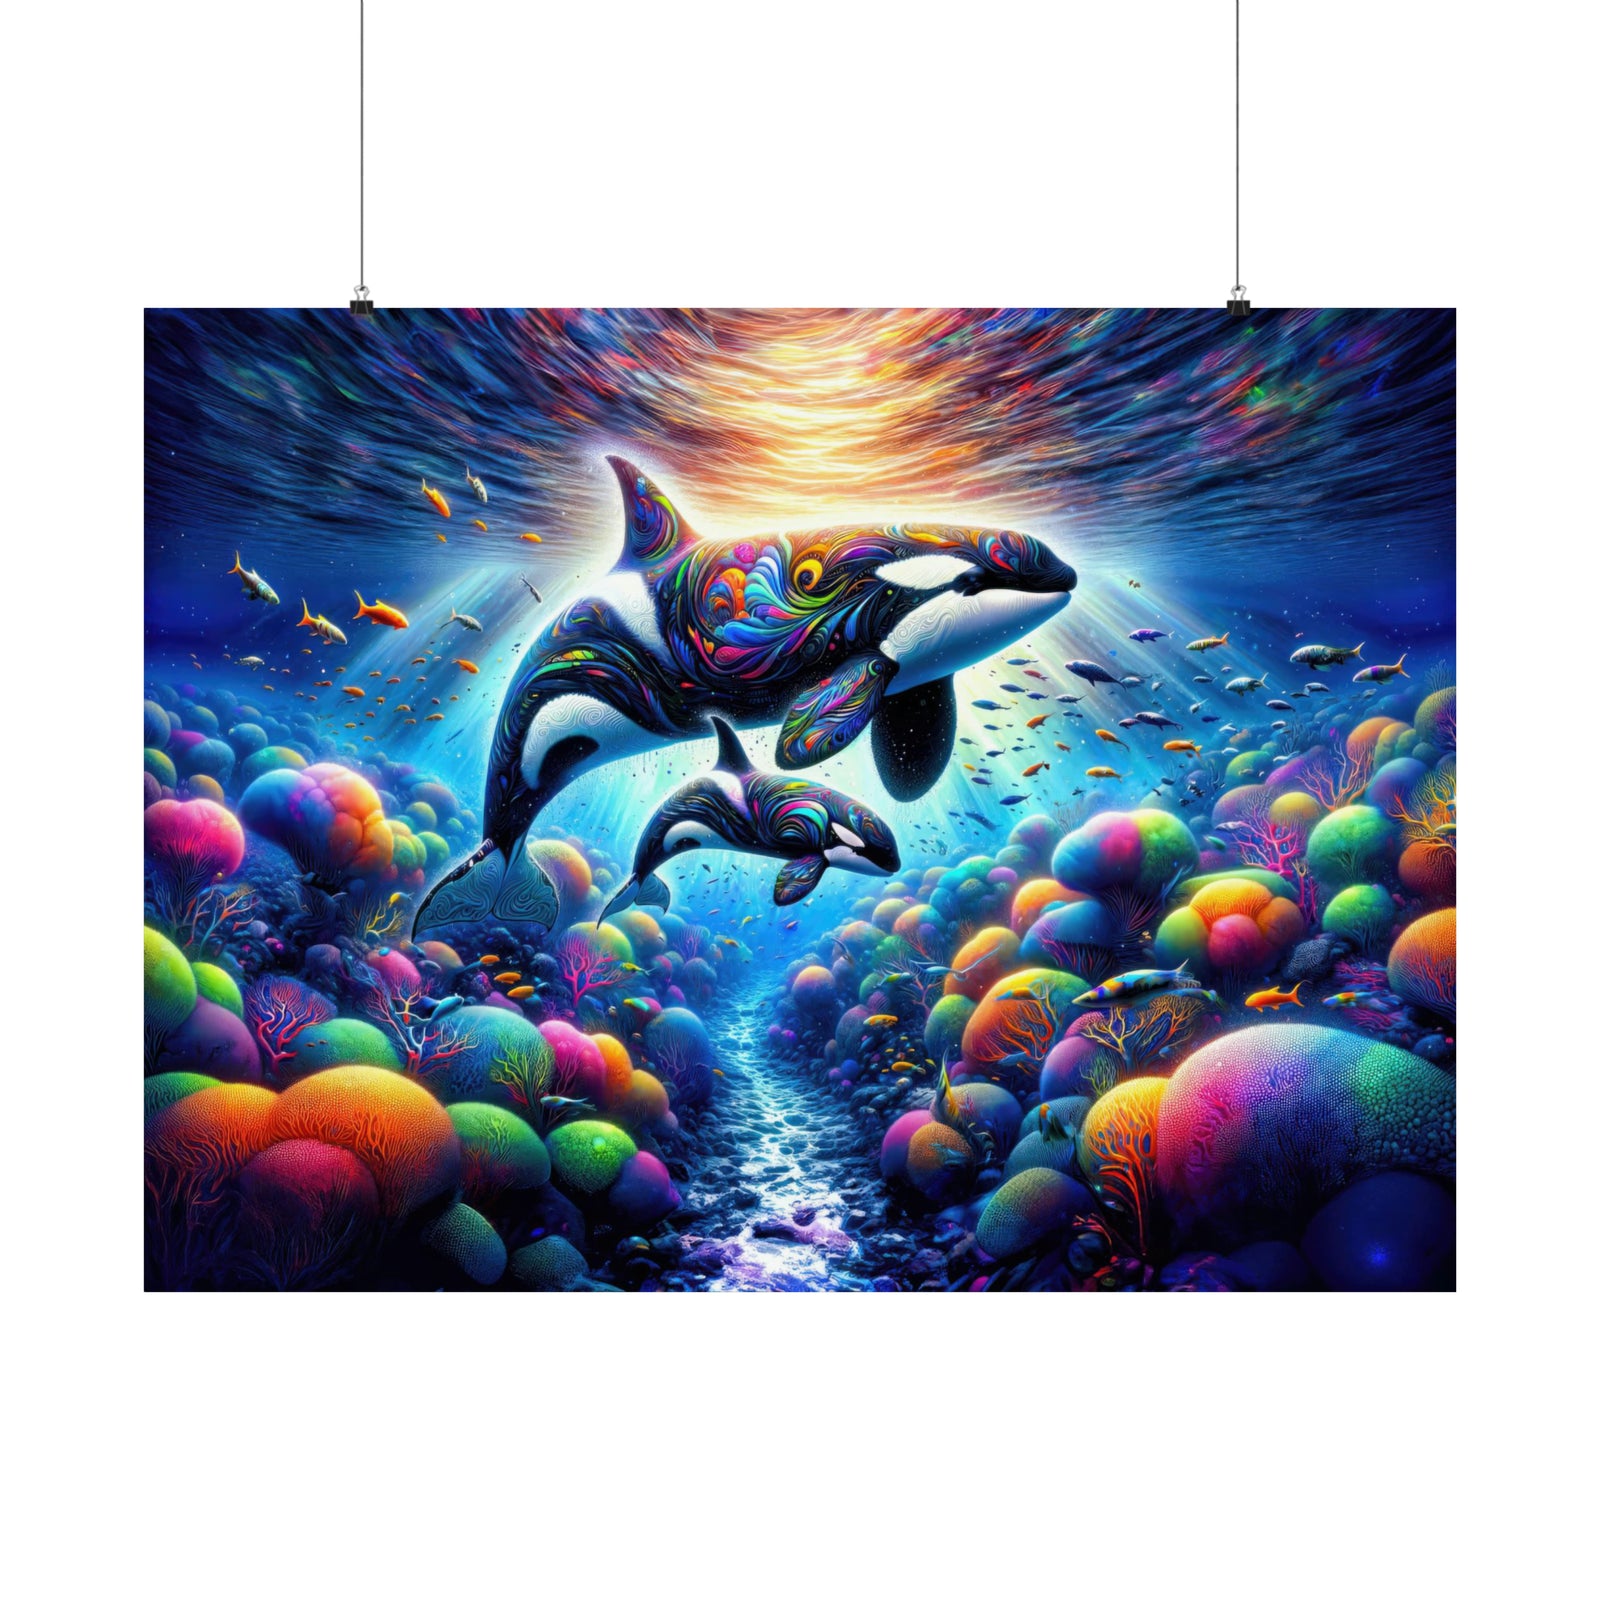 Lullaby of the Luminous Depths Poster